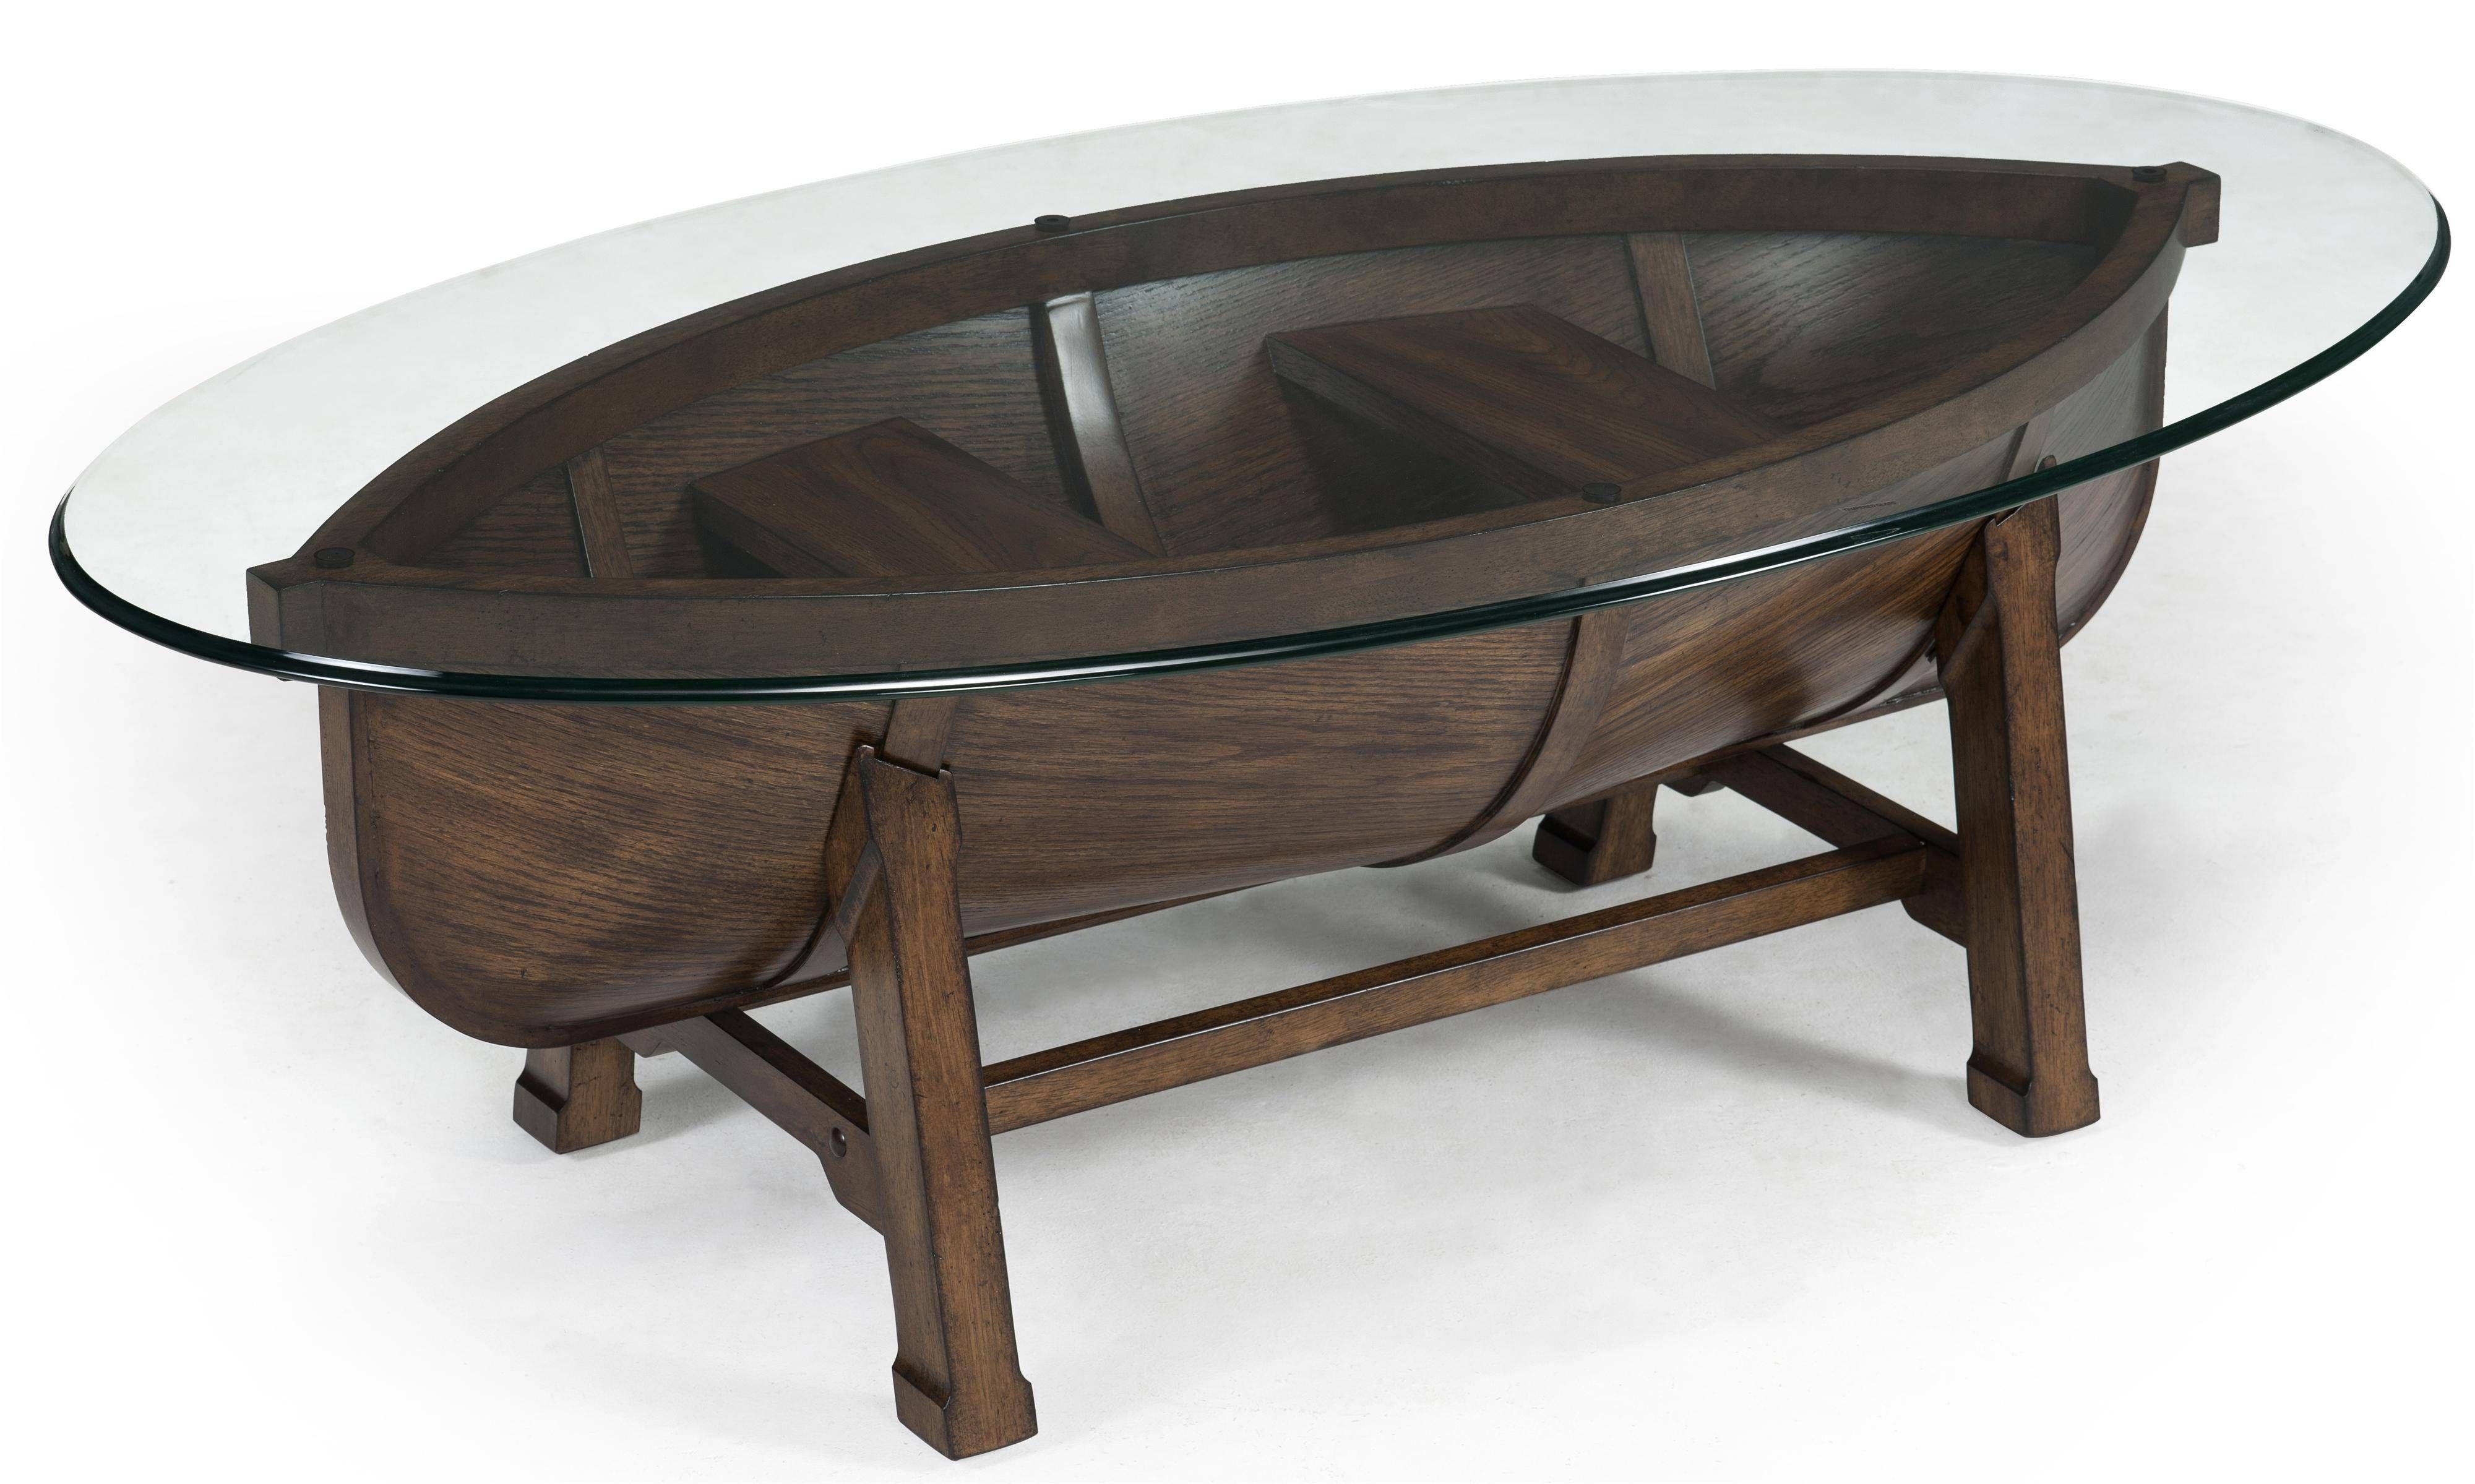 Dining Tables : Oval Dining Table Pedestal Base Dining Tabless For Coffee Tables With Oval Shape (View 23 of 30)